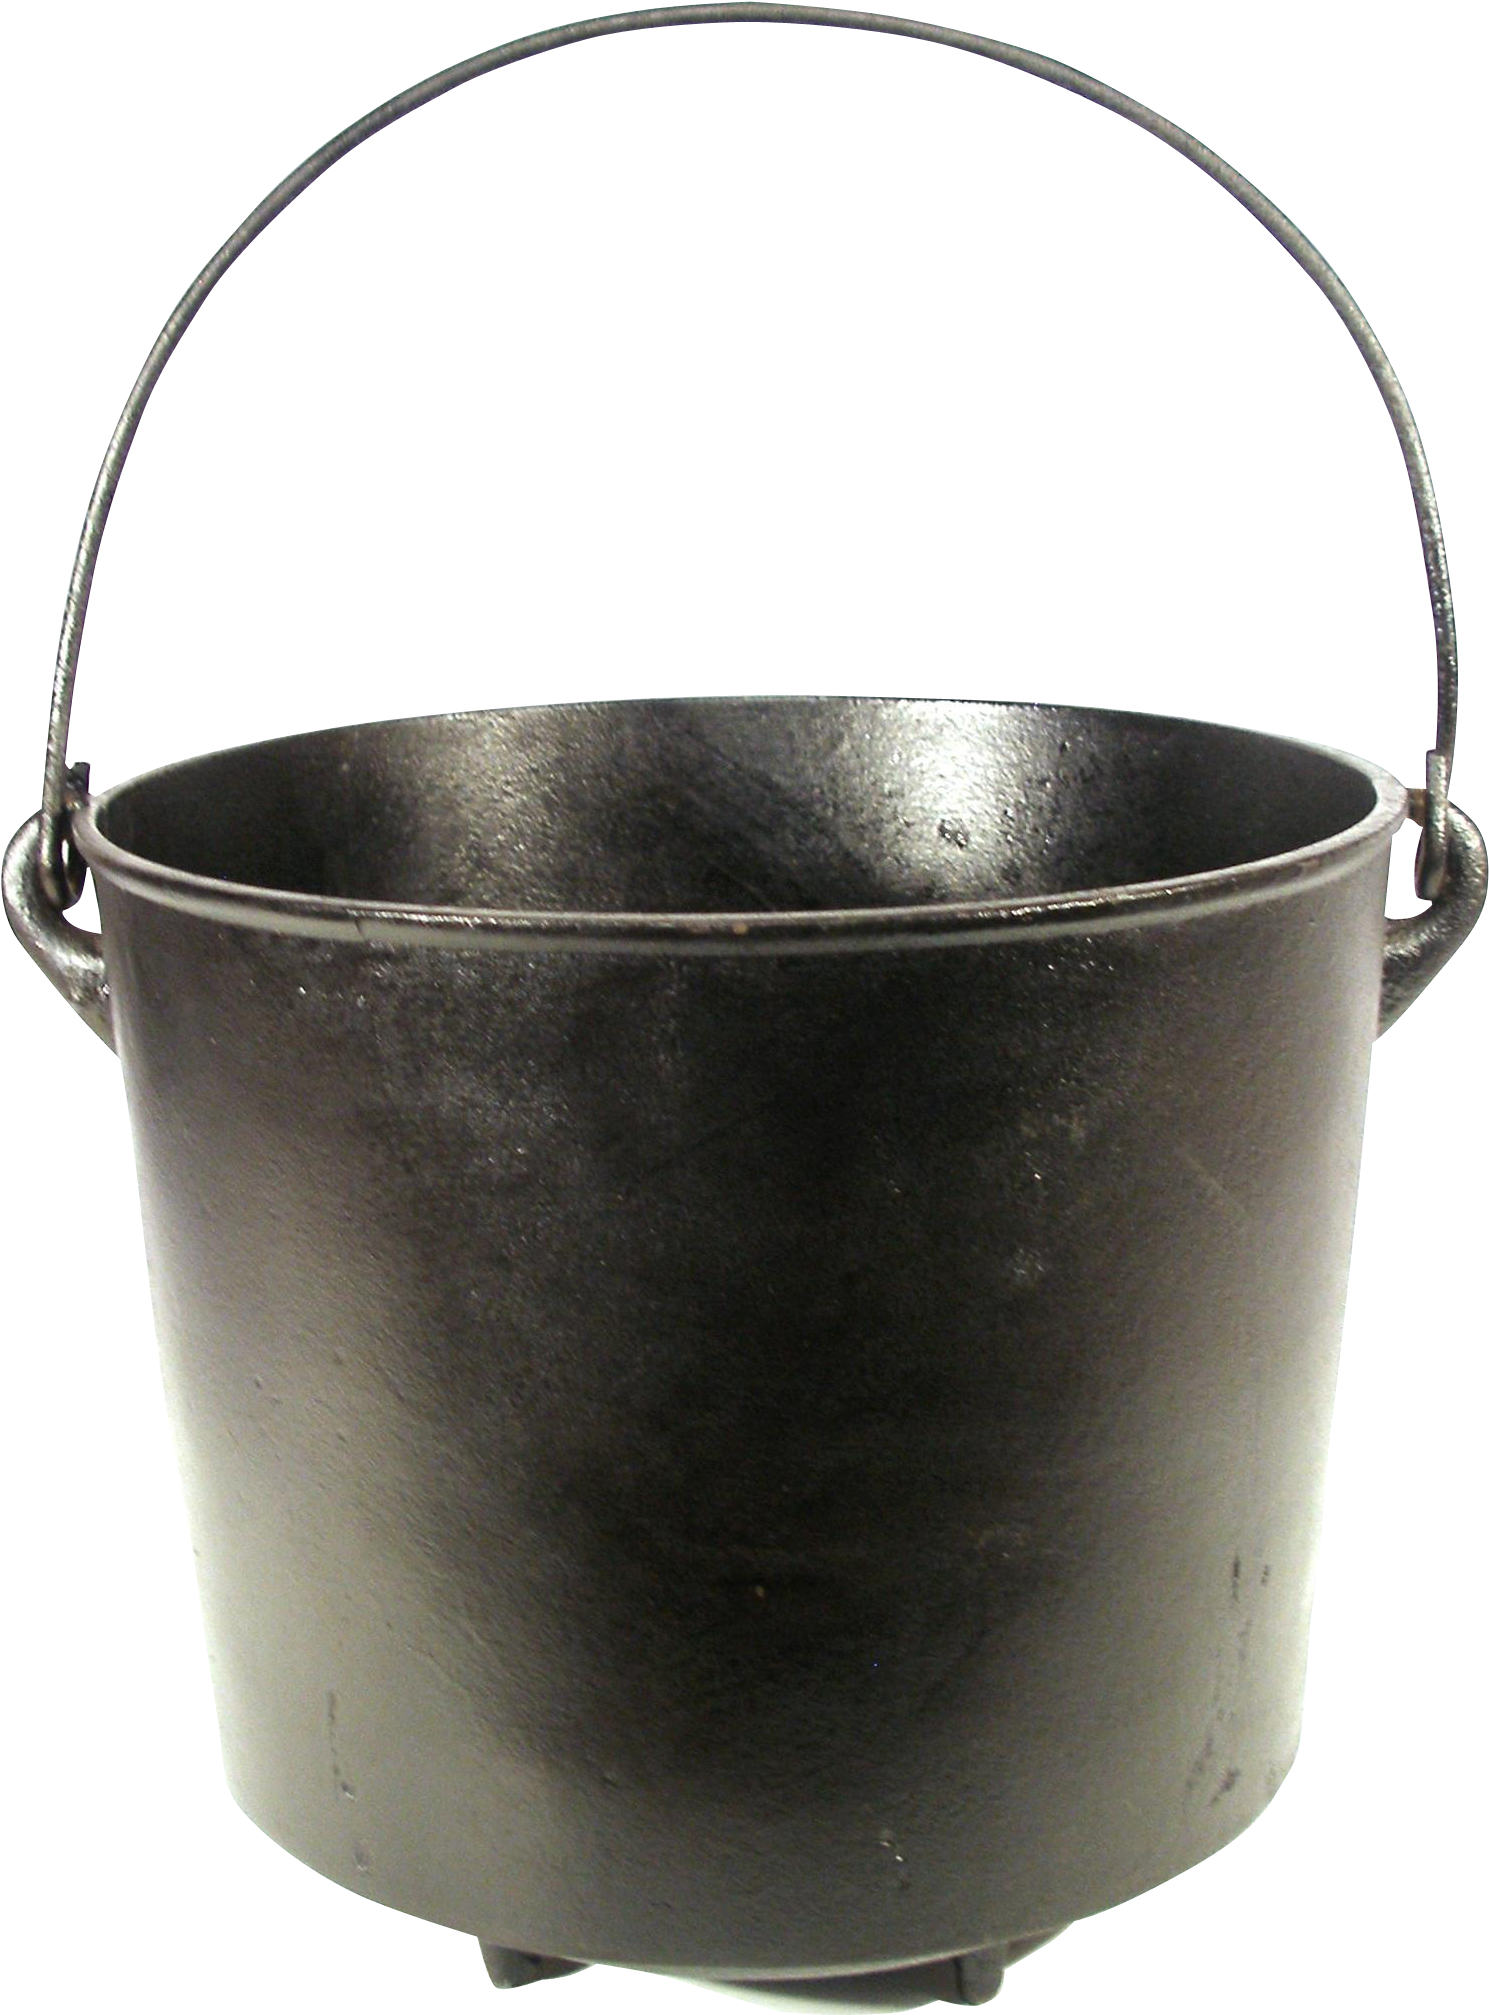 A Close Up Of A Bucket